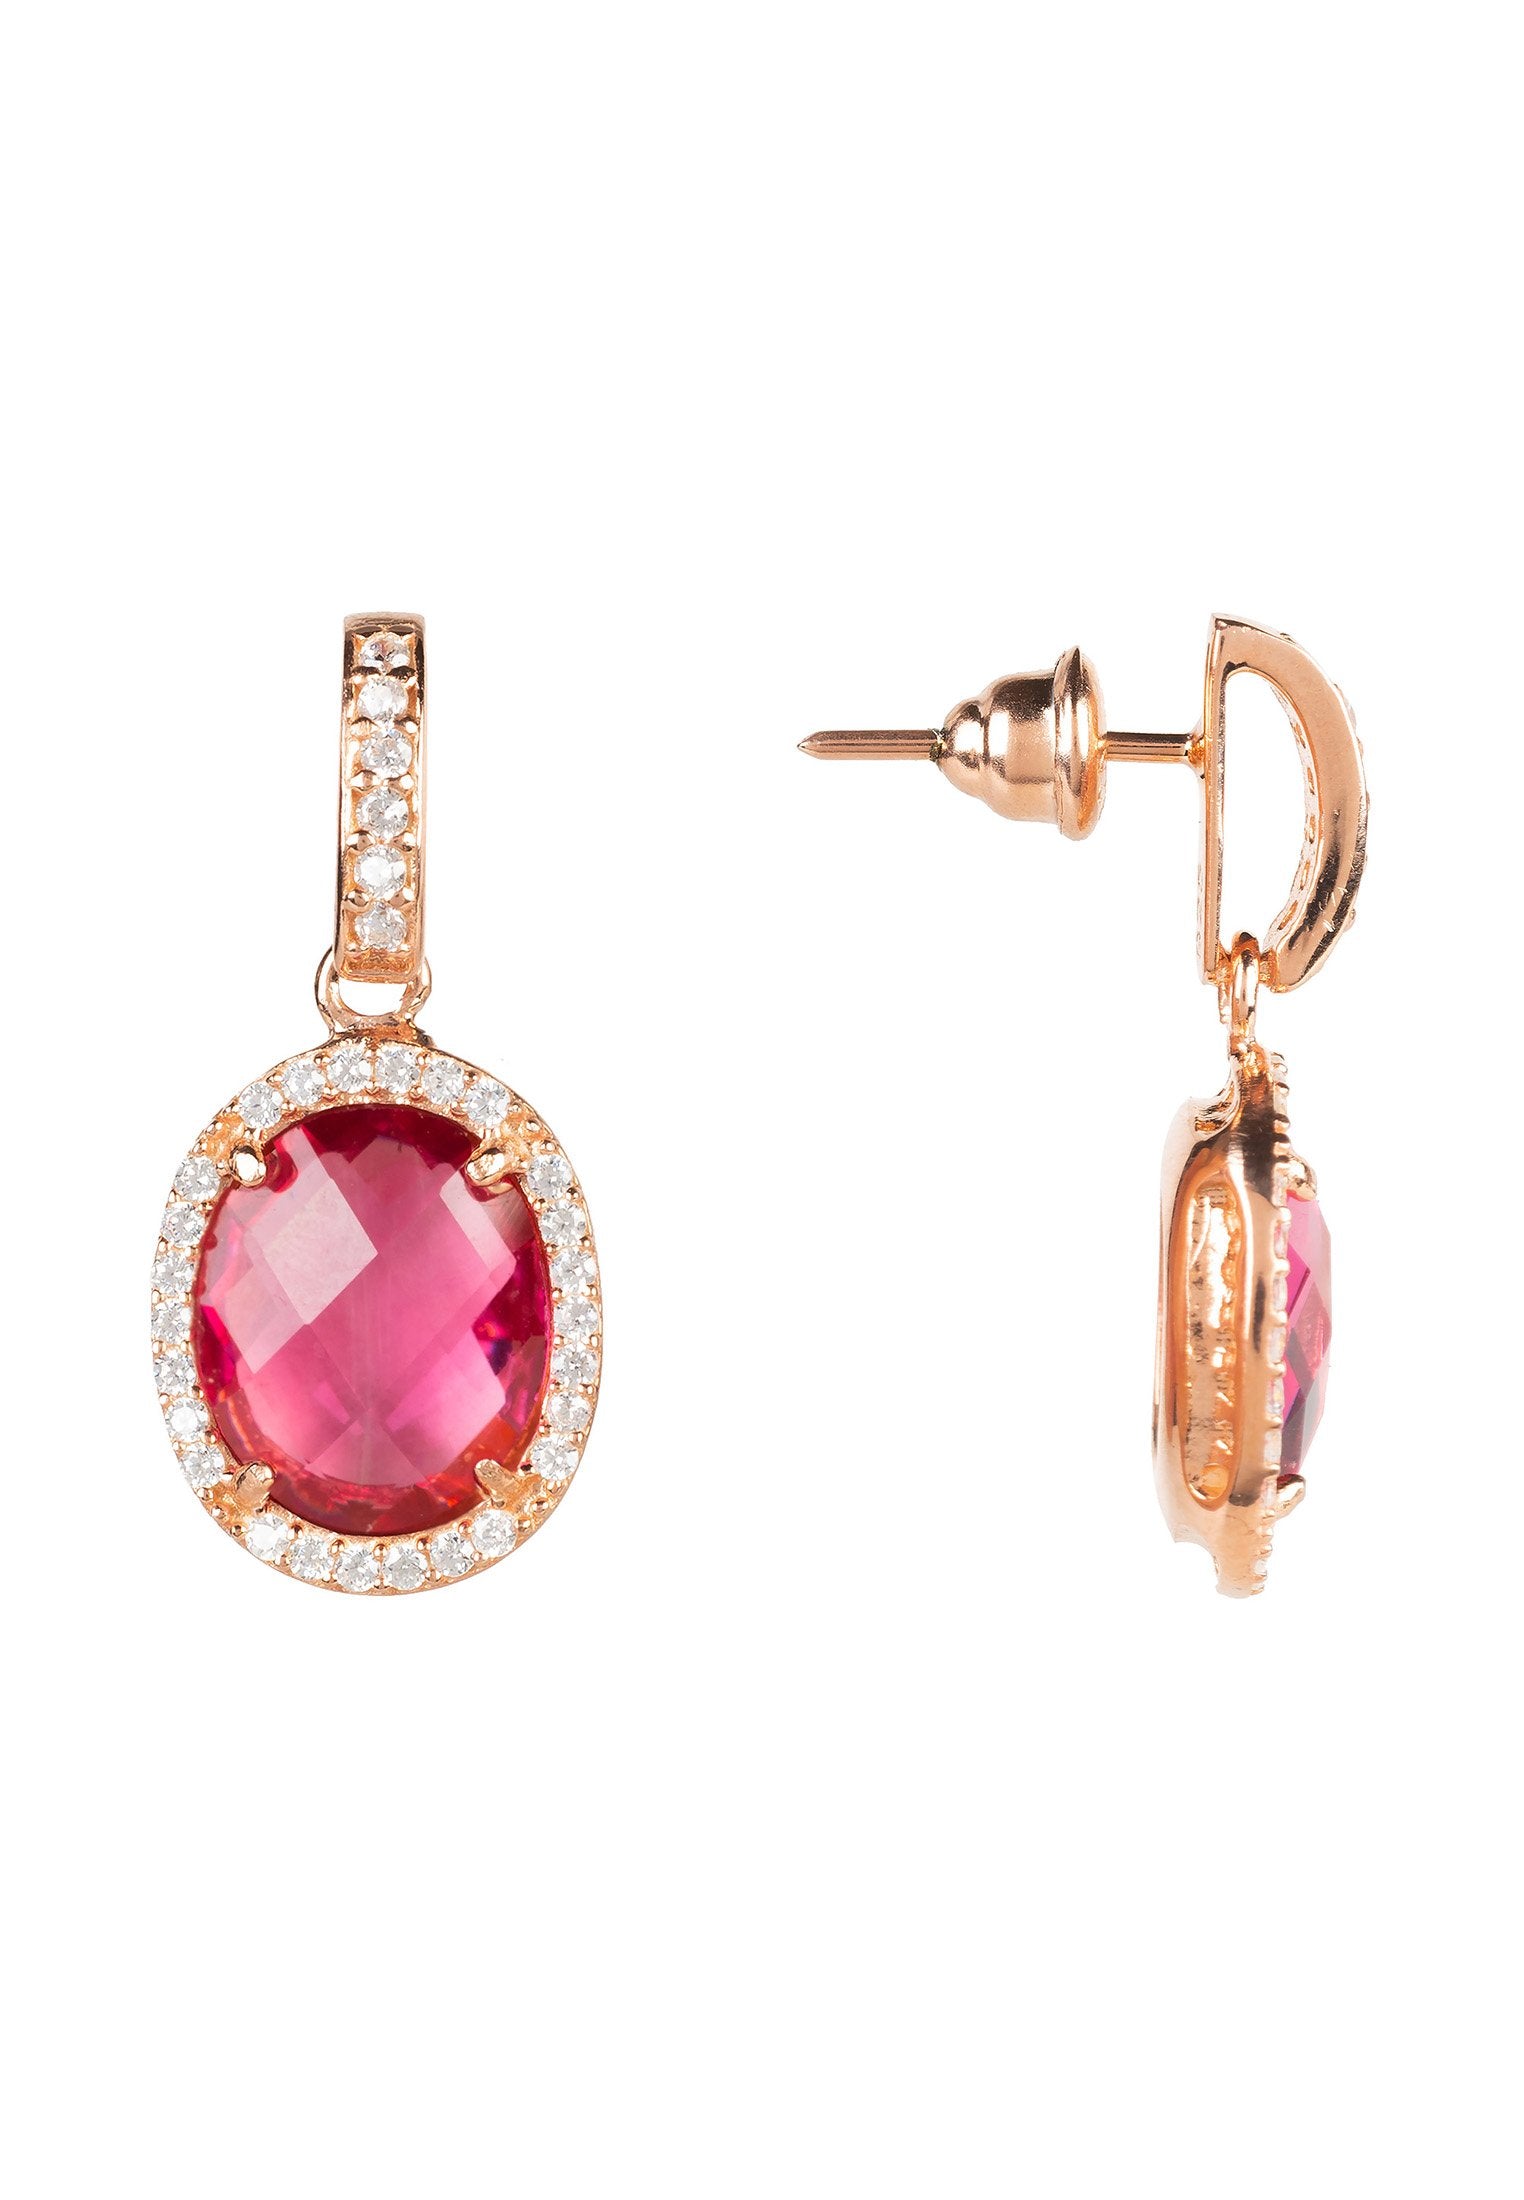 Regal Oval Gemstone Drop Earrings in Rose Gold with Pink Tourmaline - Jewelry & Watches - Bijou Her -  -  - 